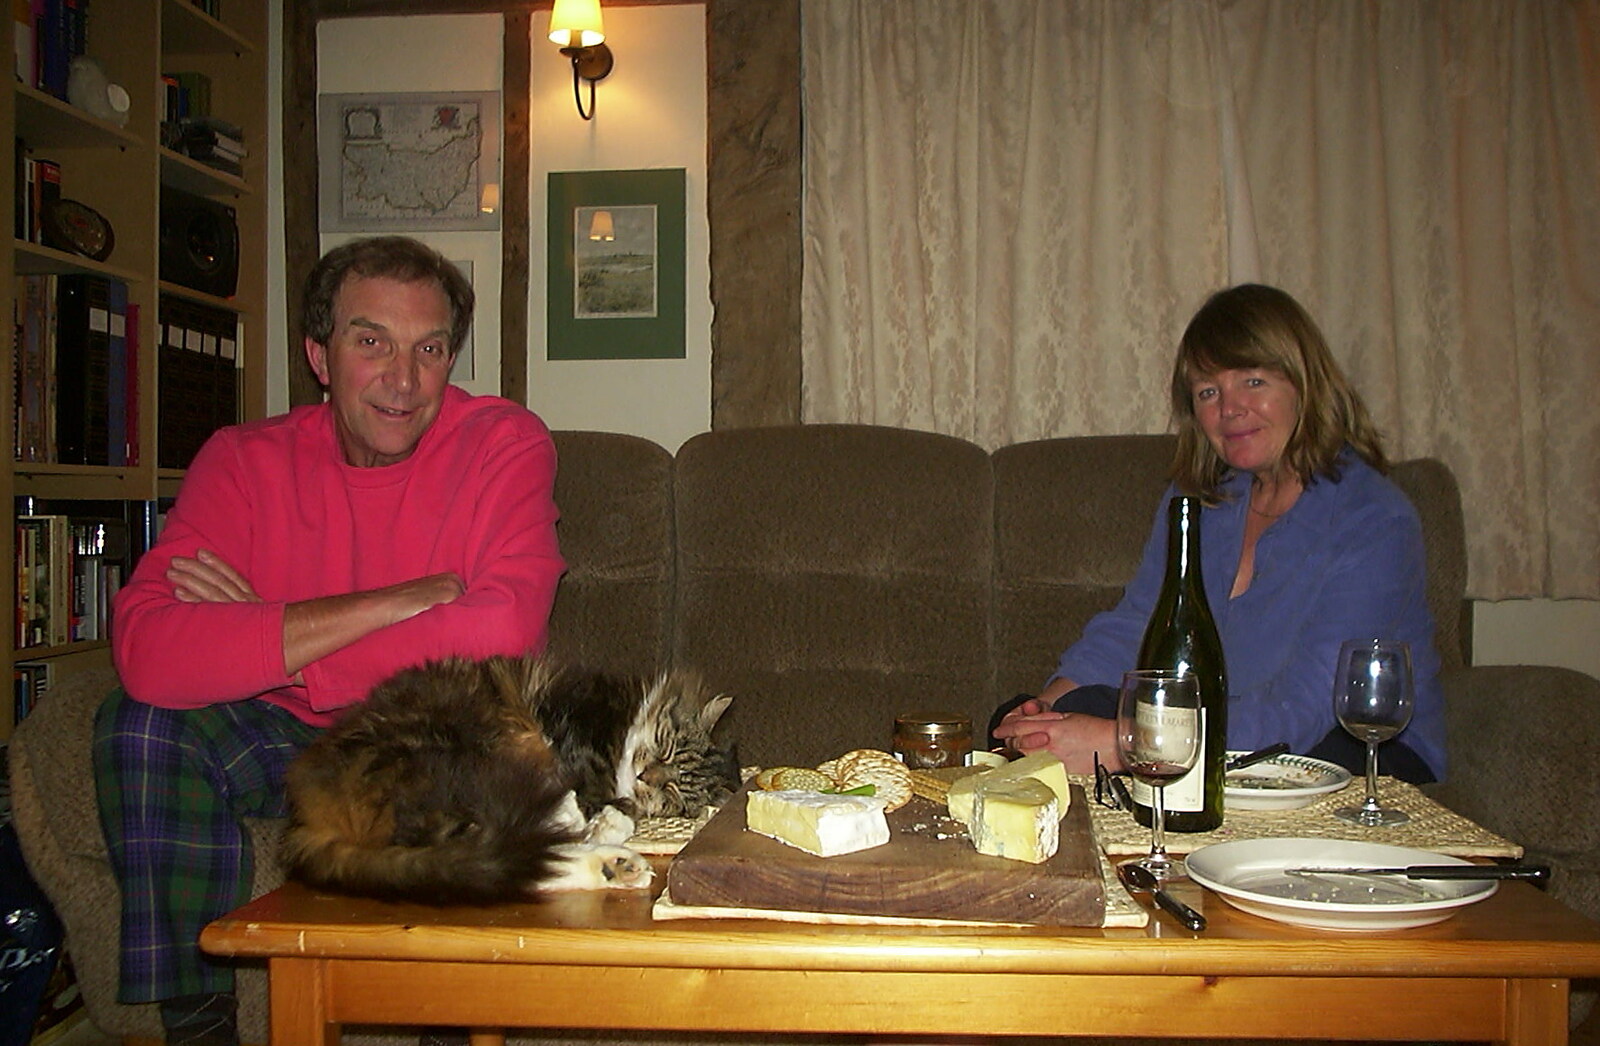 There's a cheeseboard and cat thing from Mother and Mike Visit, and Cat Photos, Brome, Suffolk - 1st September 2002